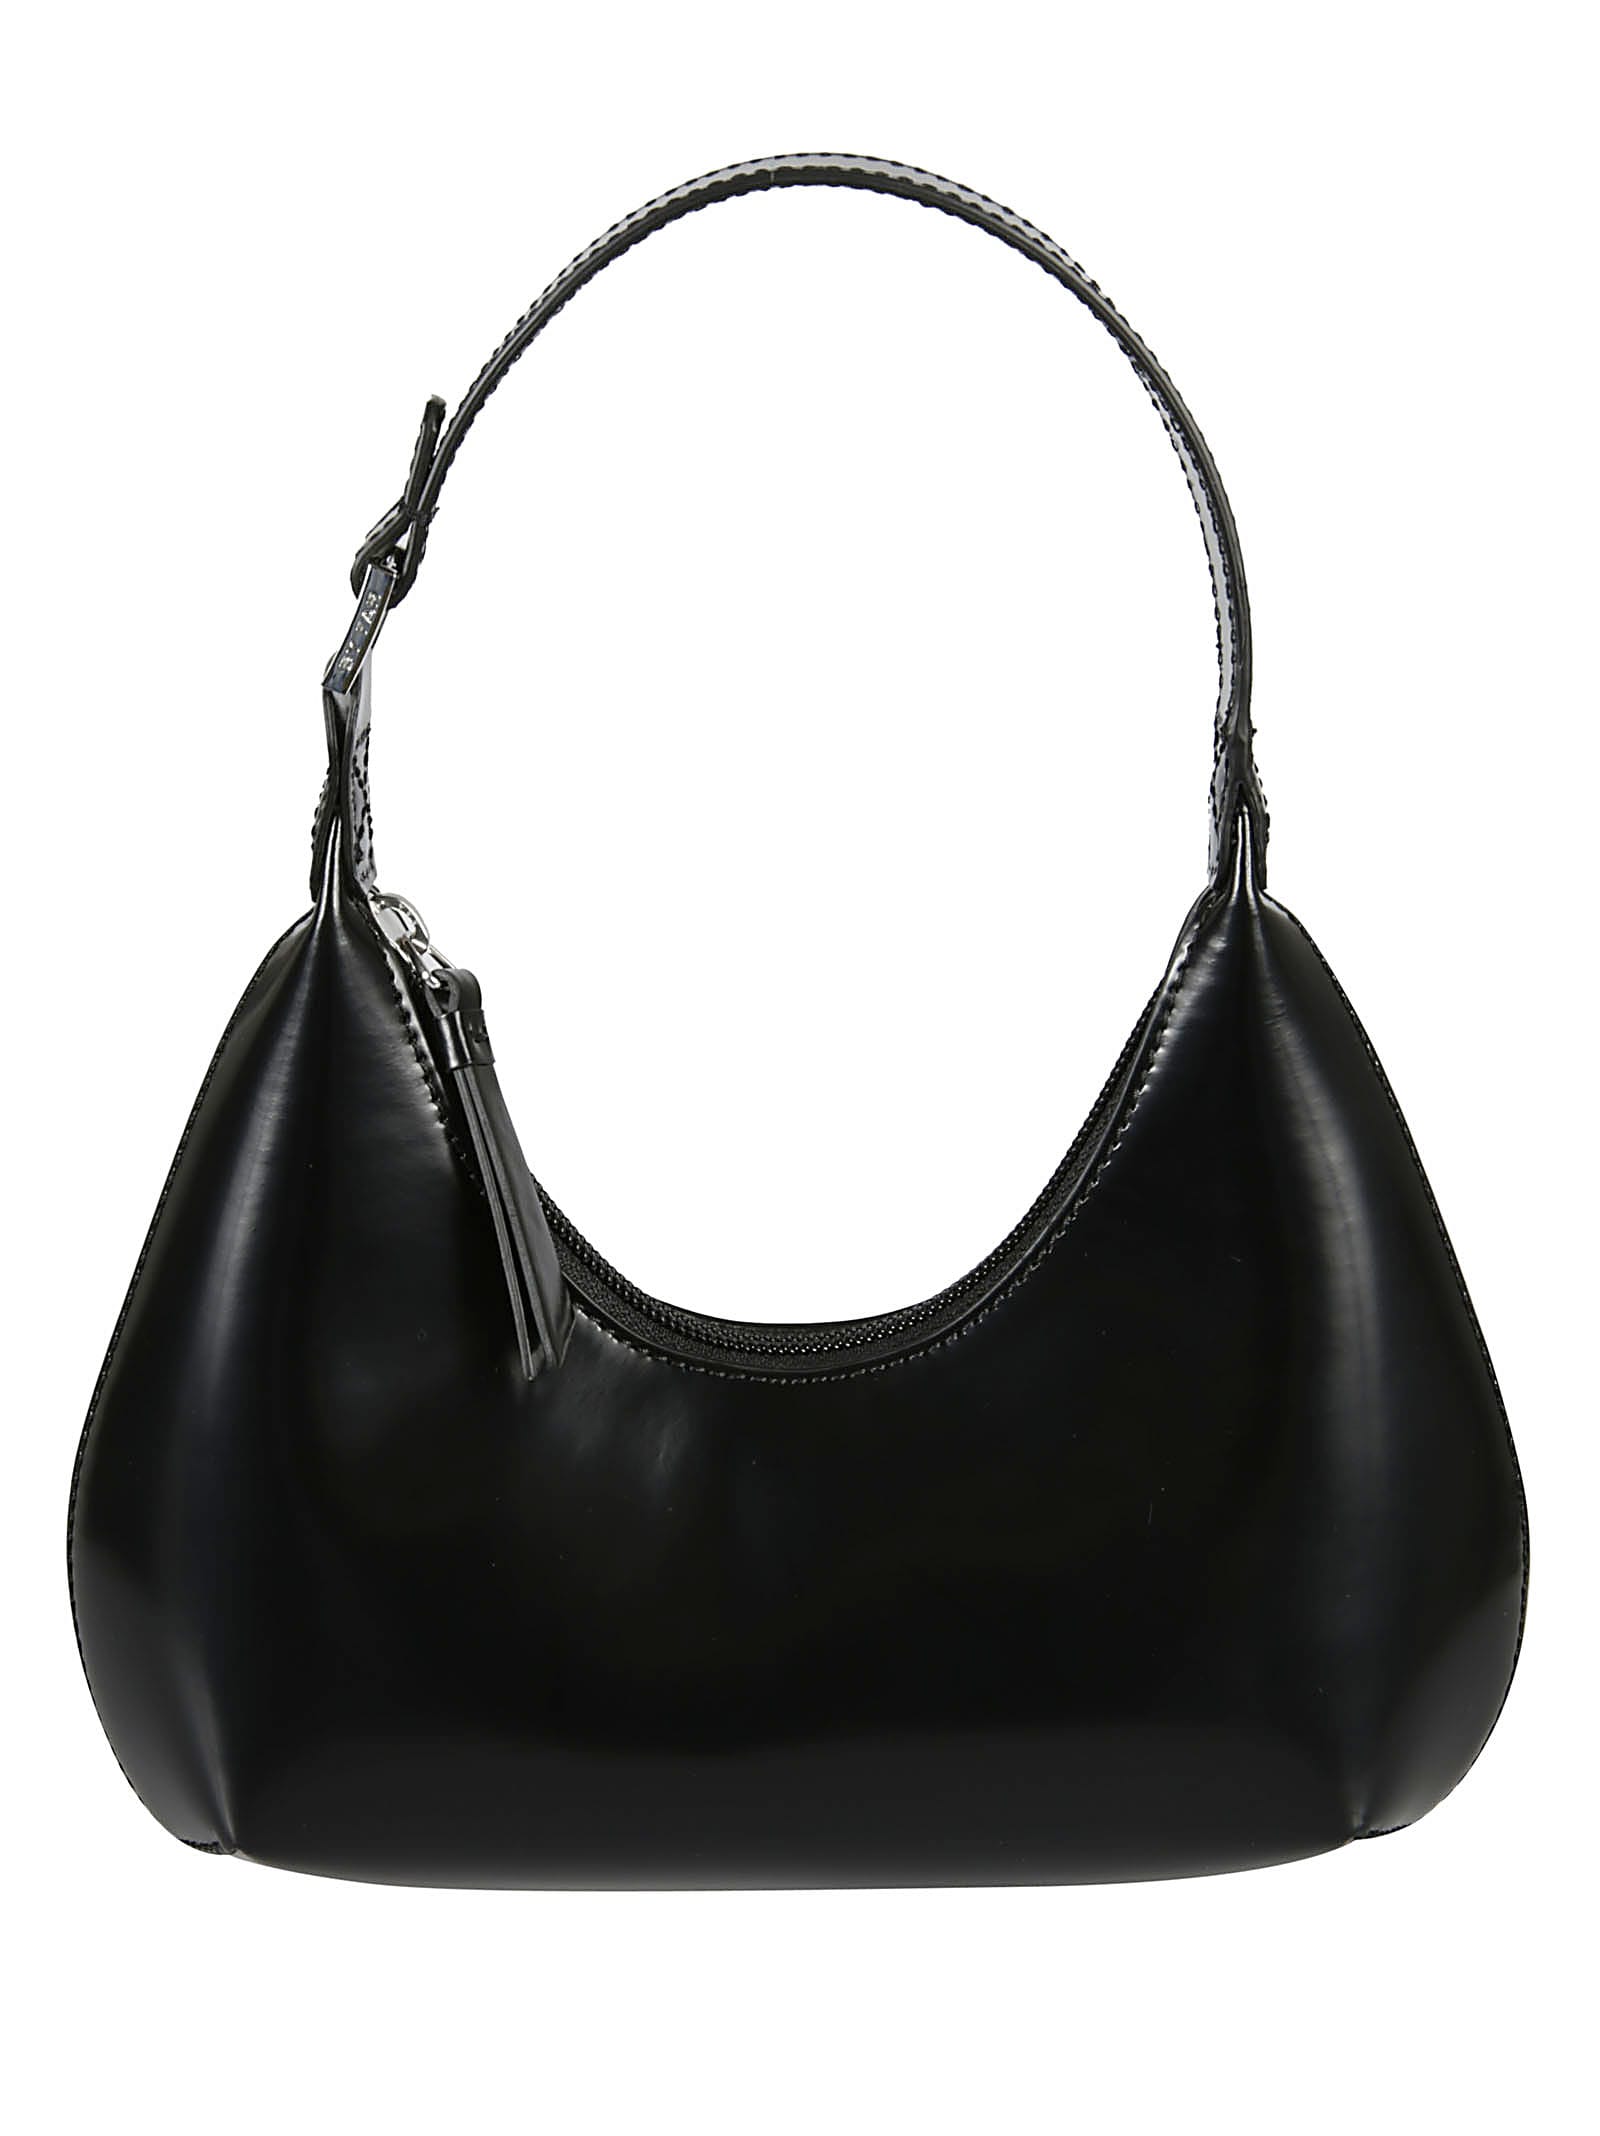 BY FAR Curve Zip Tote